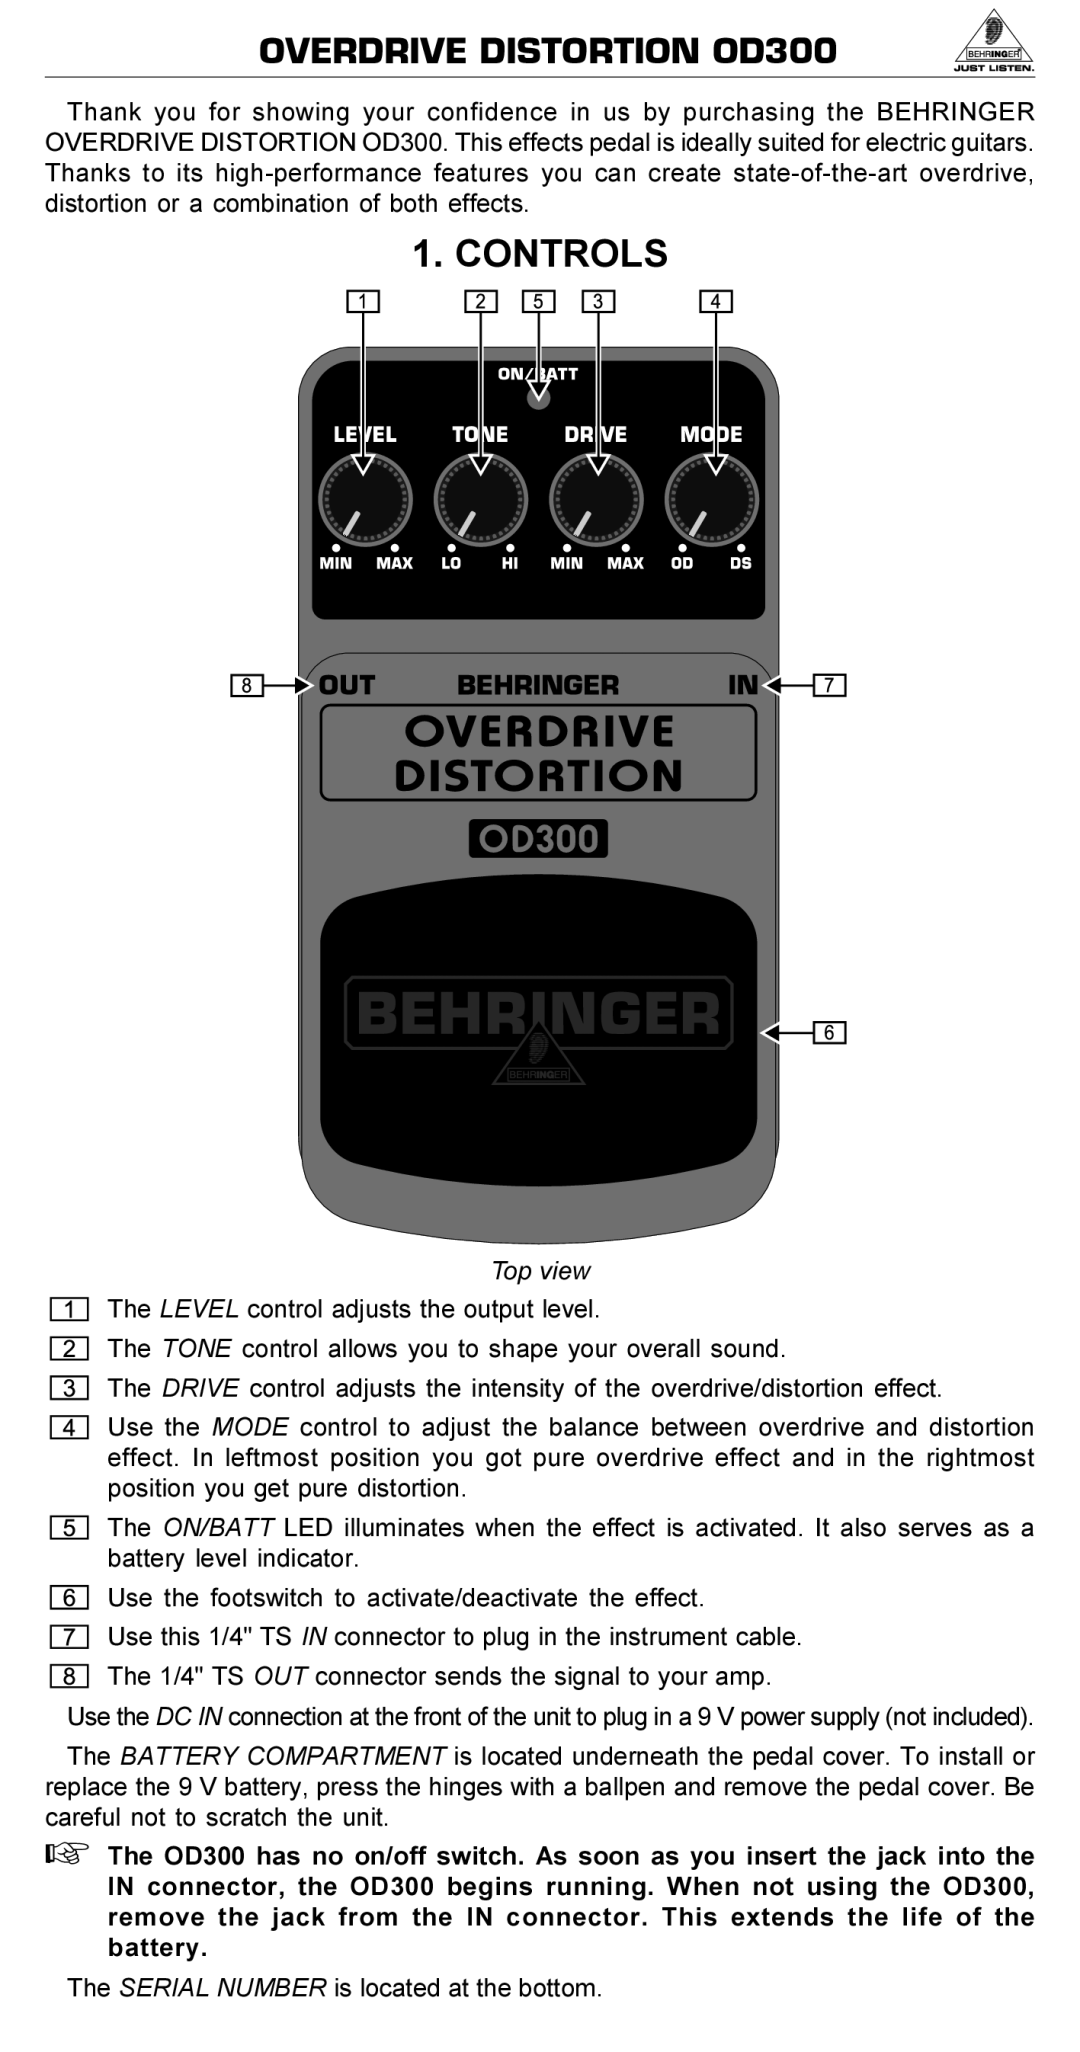 Behringer manual OVERDRIVE DISTORTION OD300, Controls, Top view 